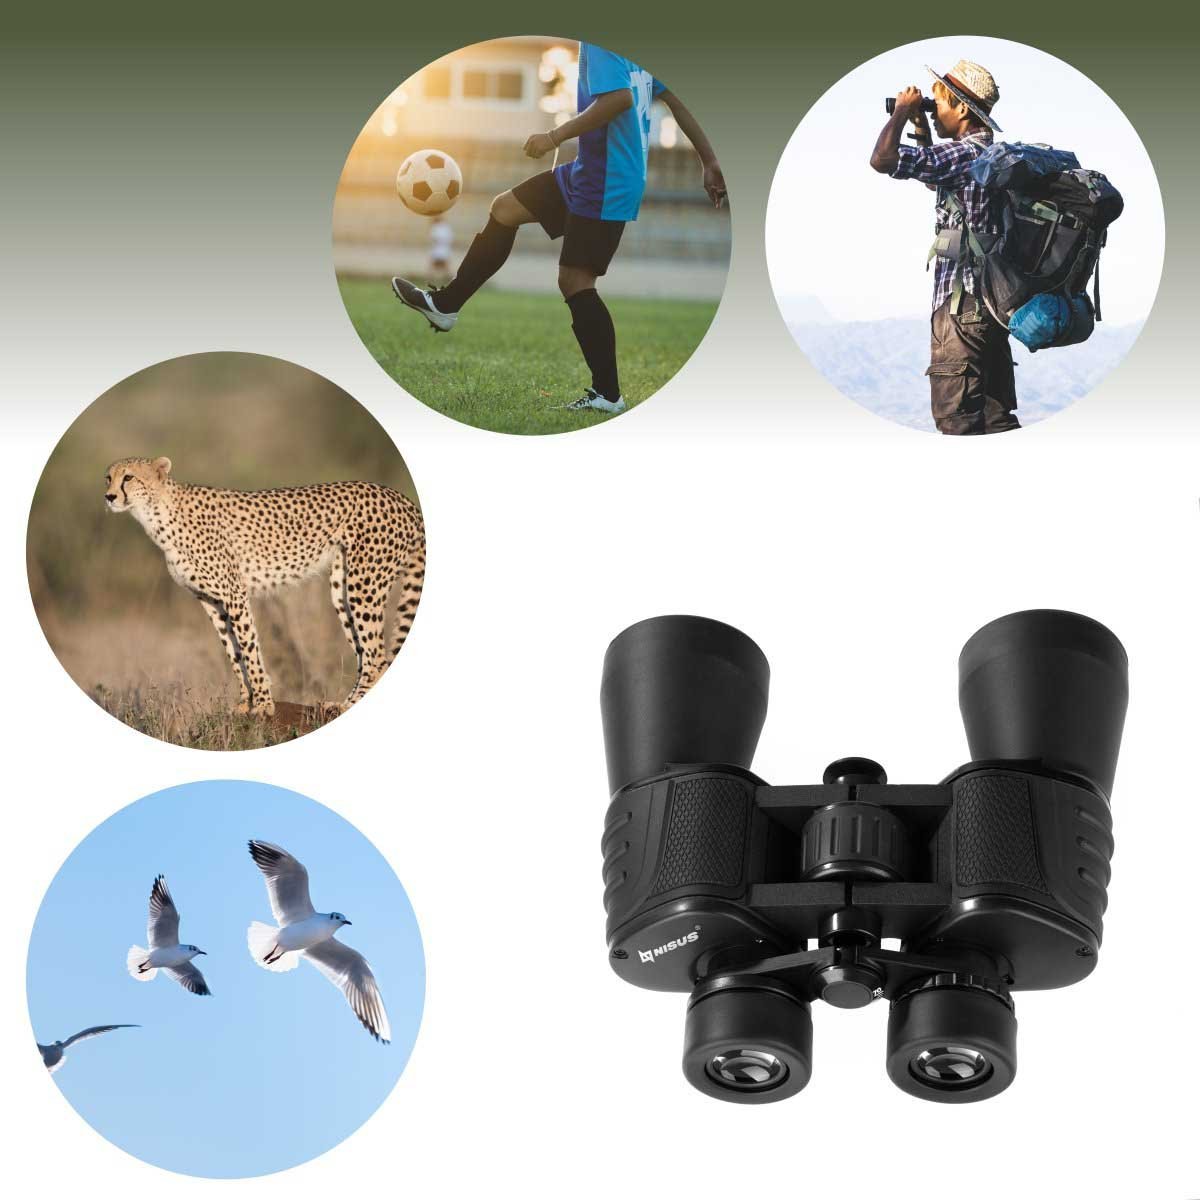 10x50 Multifunctional Camping Black Binocular could be used to explore the distant world around you